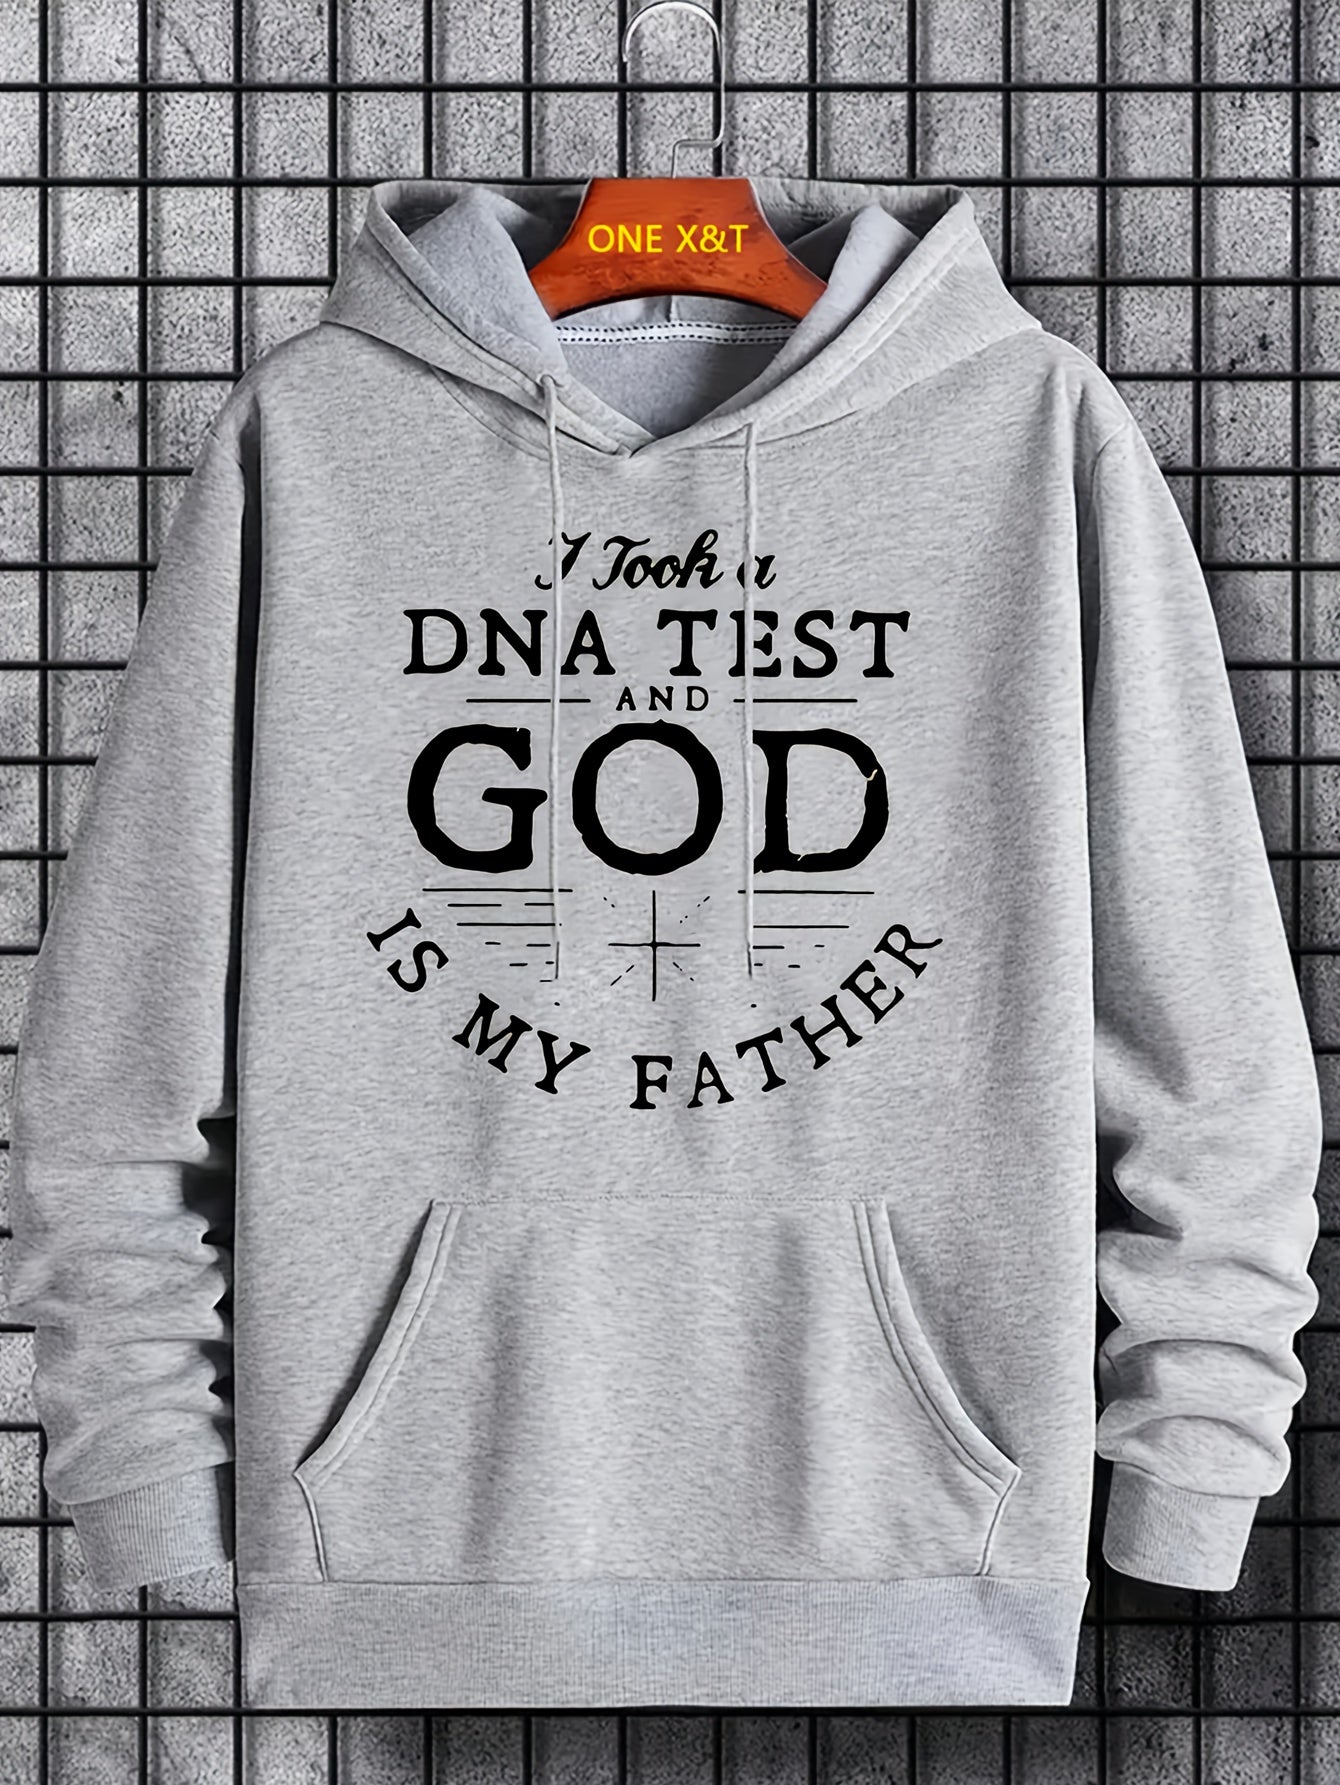 I Took A DNA Test And God Is The Father Men's Christian Pullover Hooded Sweatshirt claimedbygoddesigns